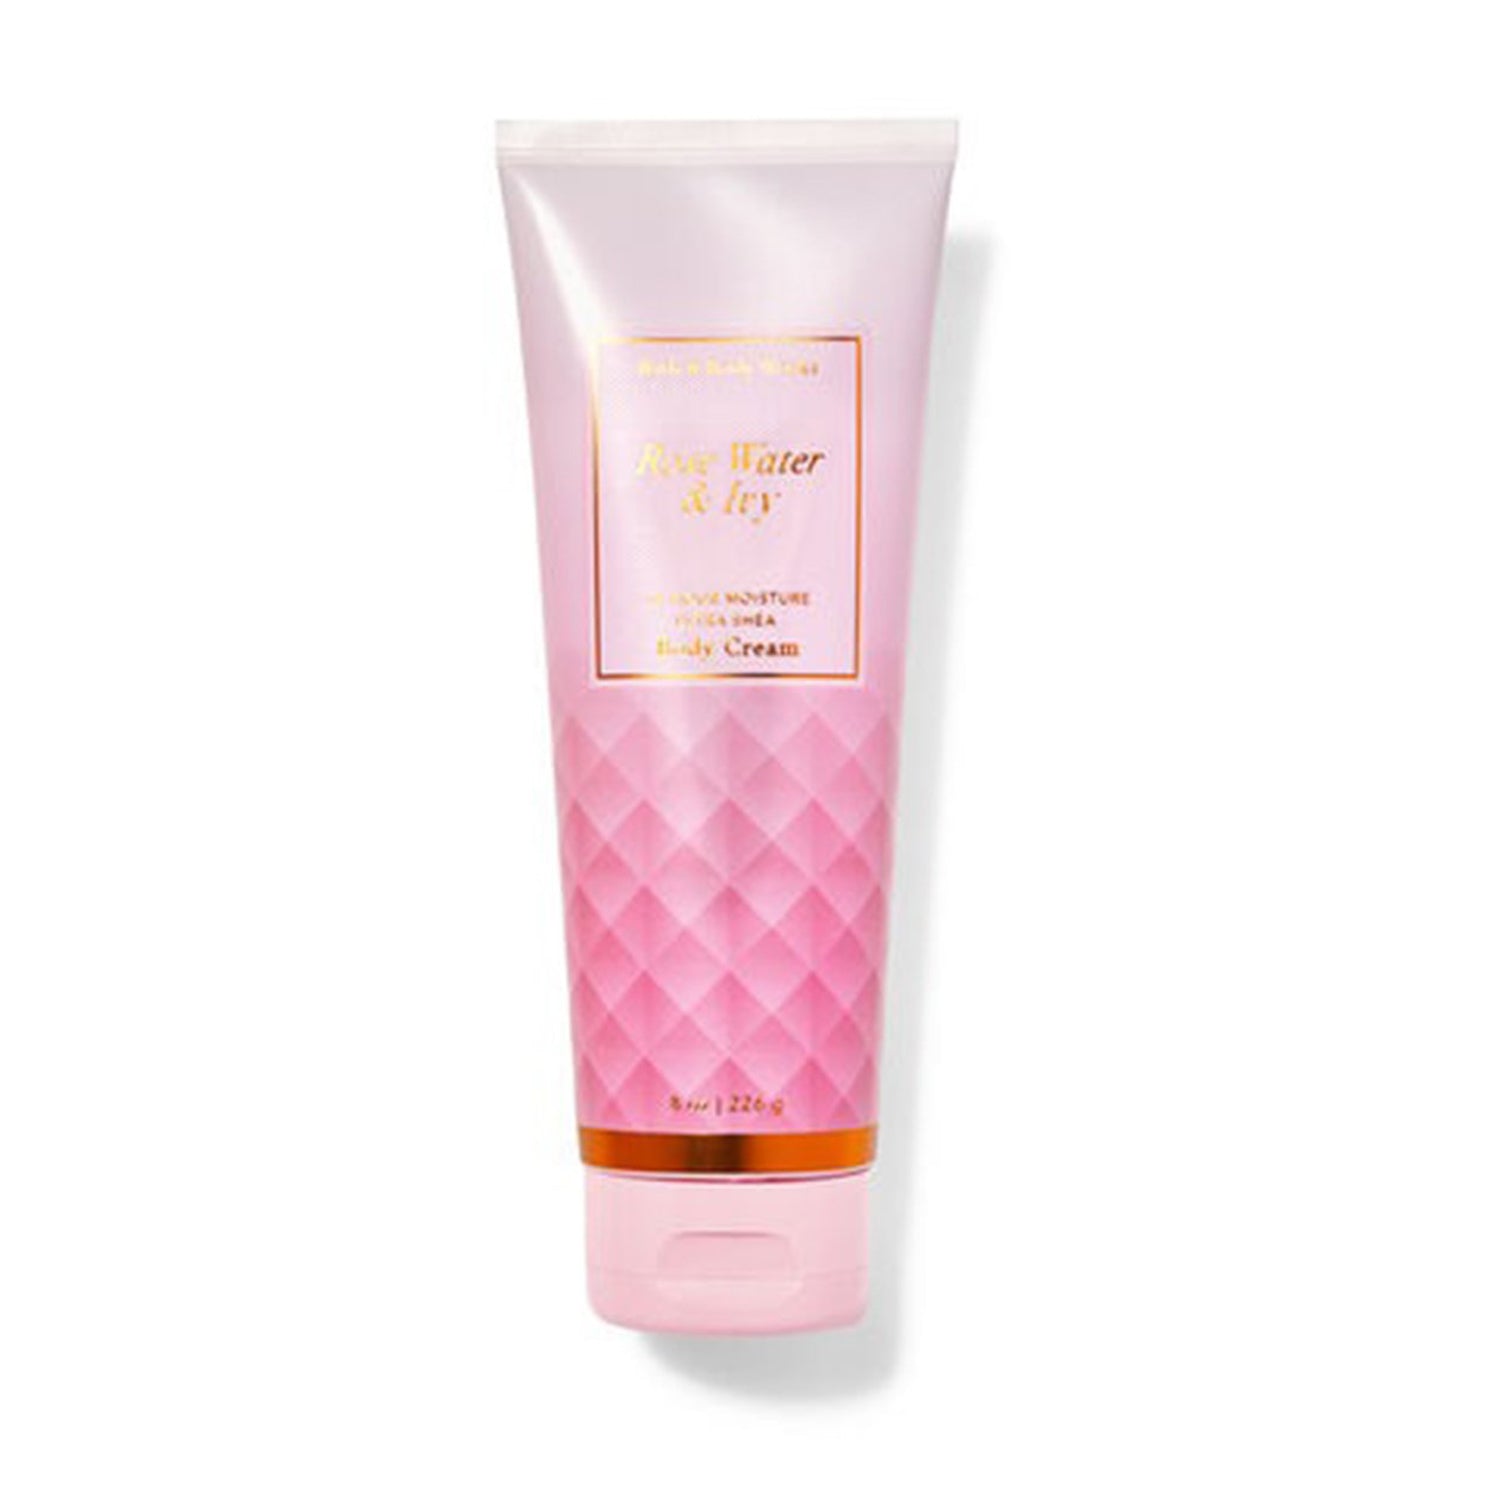 Shop bath and body works body cream in rose water and ivyt fragrance available at heygirl.pk for delivery in Pakistan